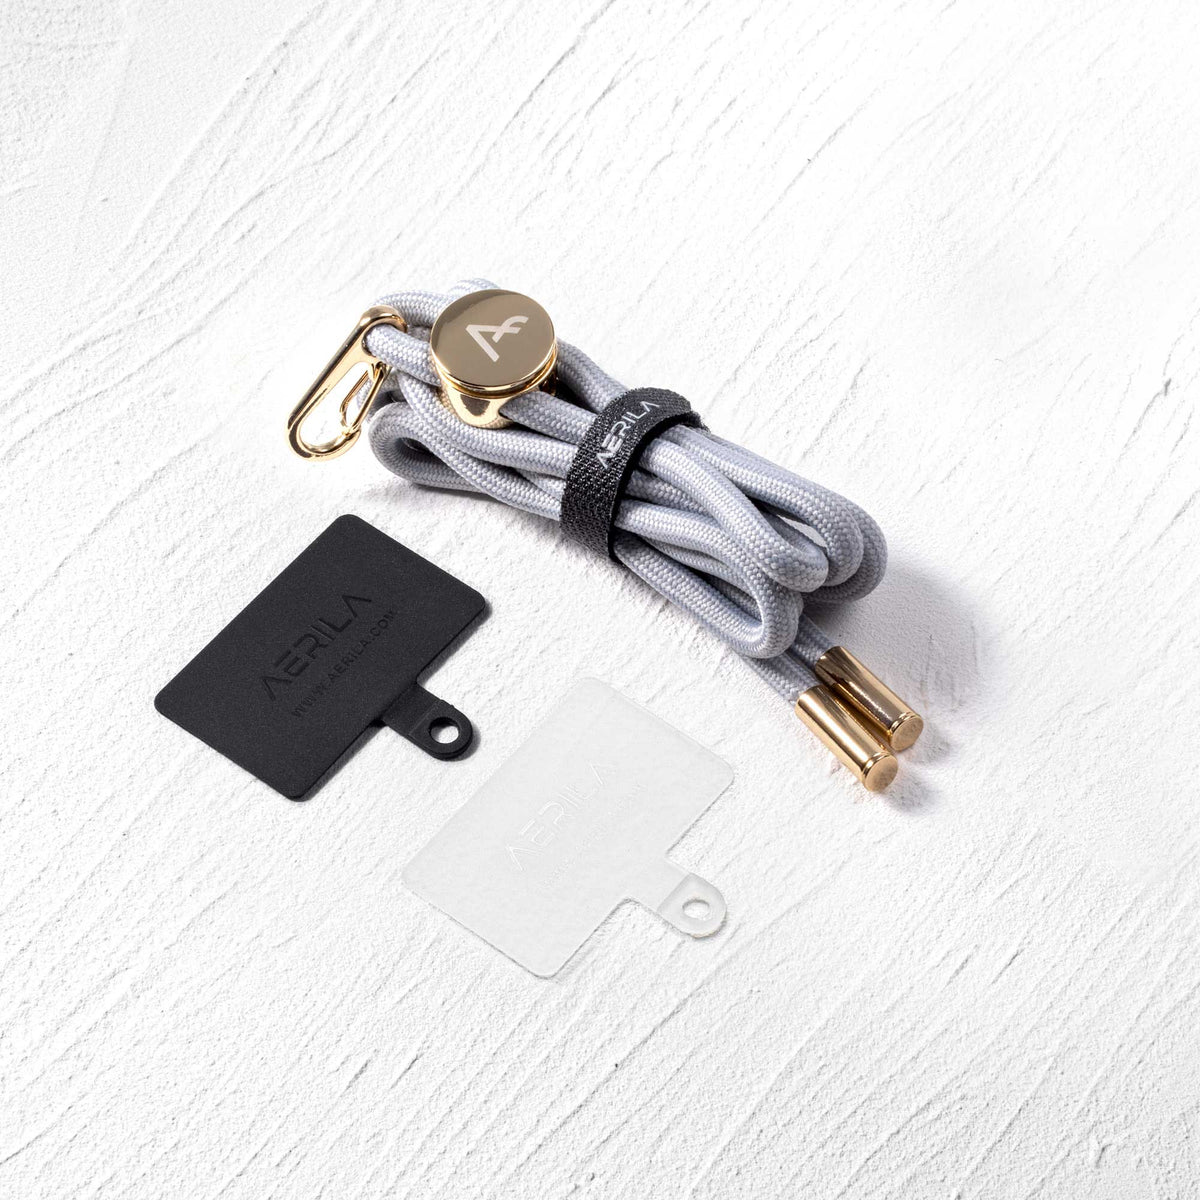 NORE Phone Lanyard set with Connector Patch Card | EVERYDAY Collection - AERILA